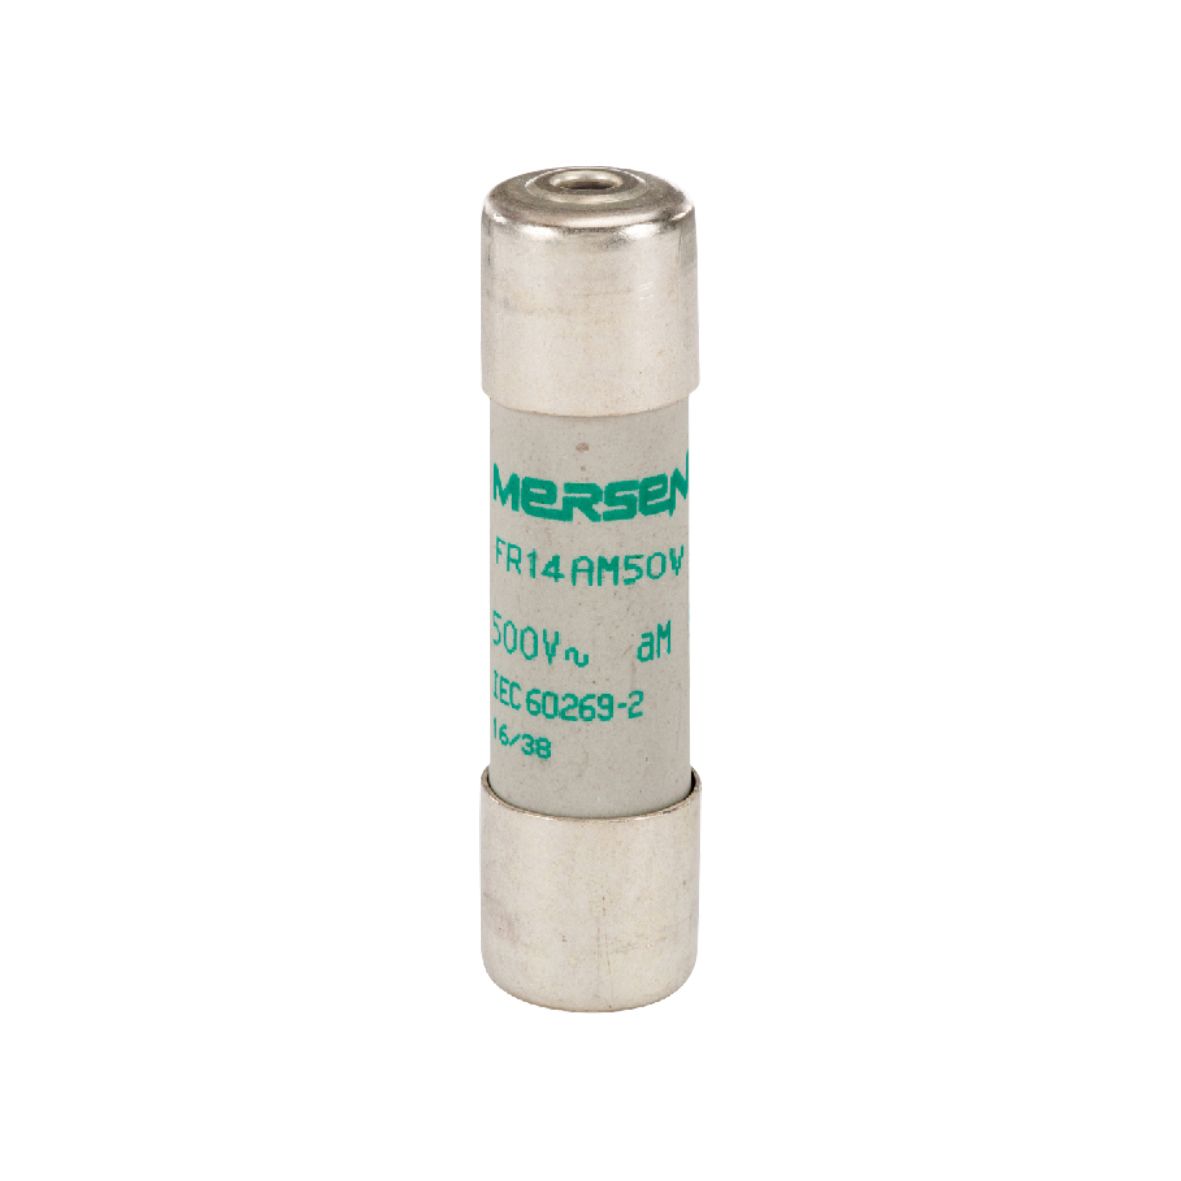 H213608 - Cylindrical fuse-link aM 500VAC 14.3x51, 25A with striker